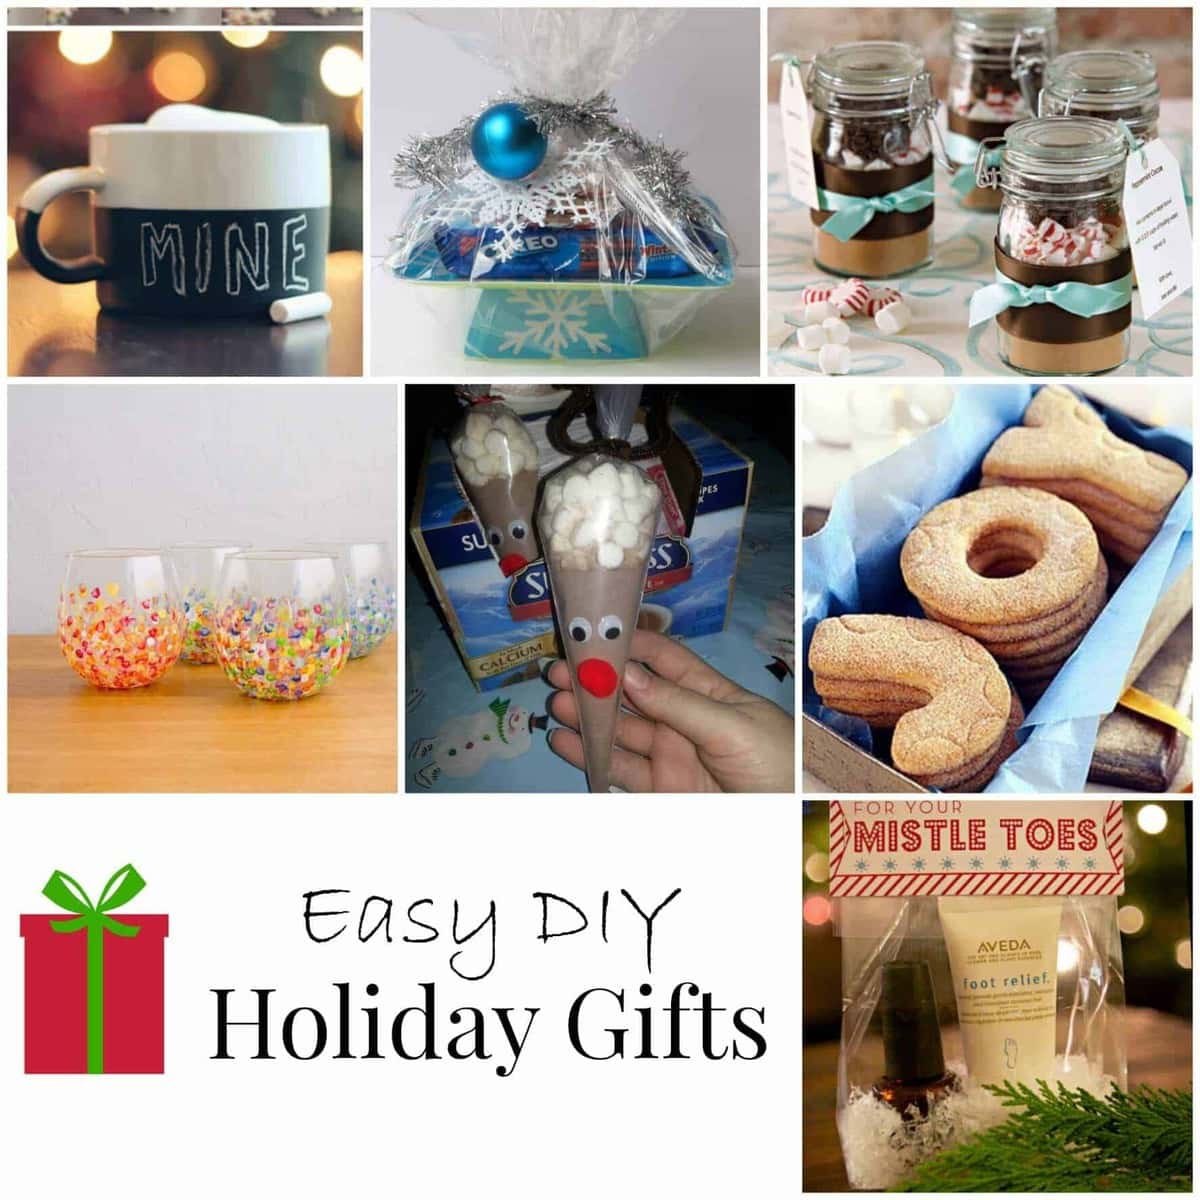 Quick and easy DIY holiday gifts!